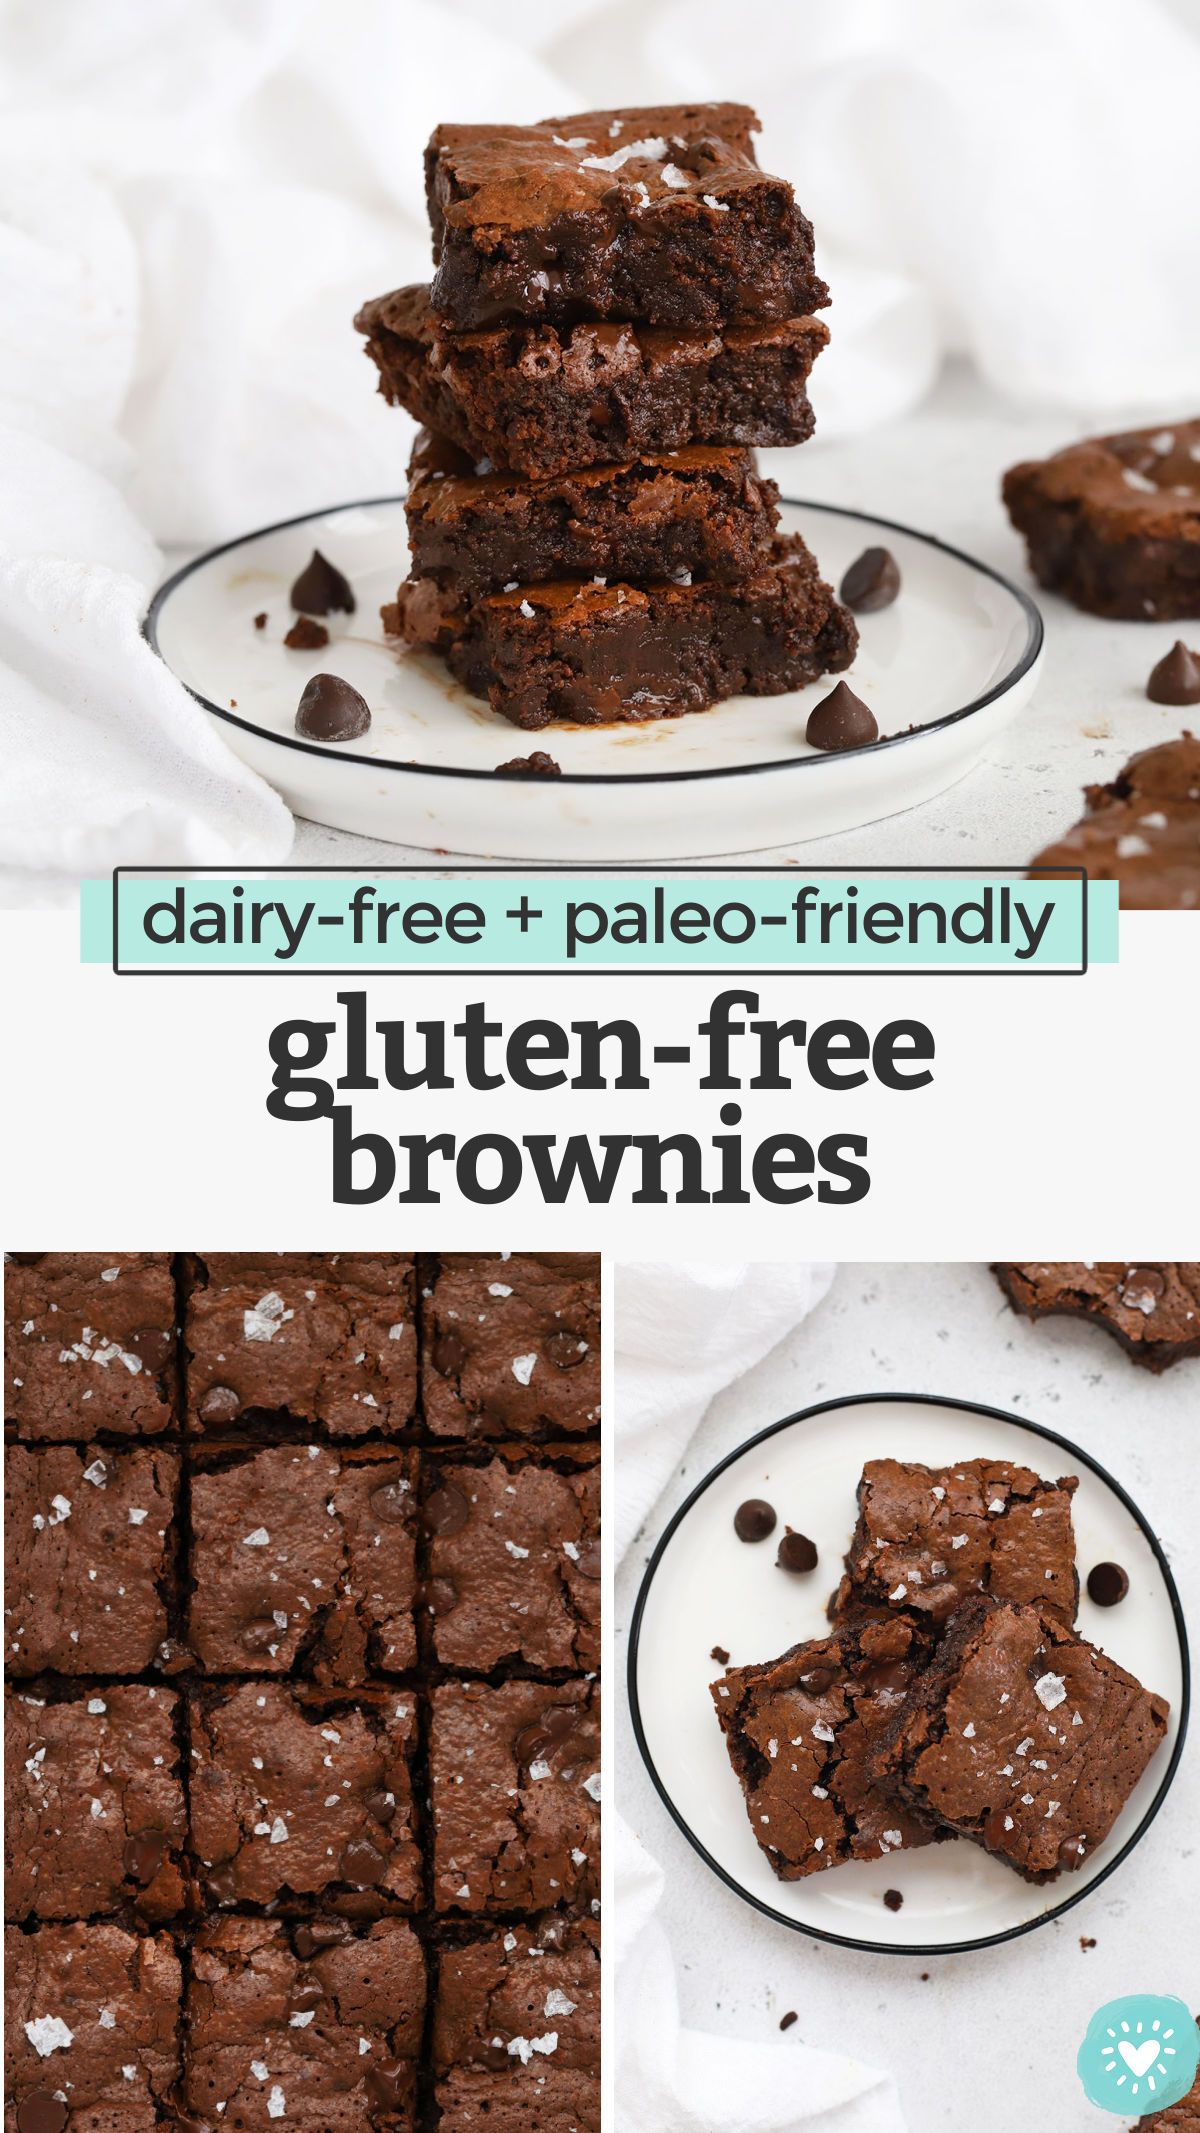 The PERFECT Gluten-Free Brownies - These almond flour brownies are everything I'm looking for--fudgy and rich, chocolatey and delicious, all without gluten, grains, or dairy! // Paleo brownies // Gluten-Free brownies // Healthy Brownies #glutenfree #paleo #brownies #almondflour